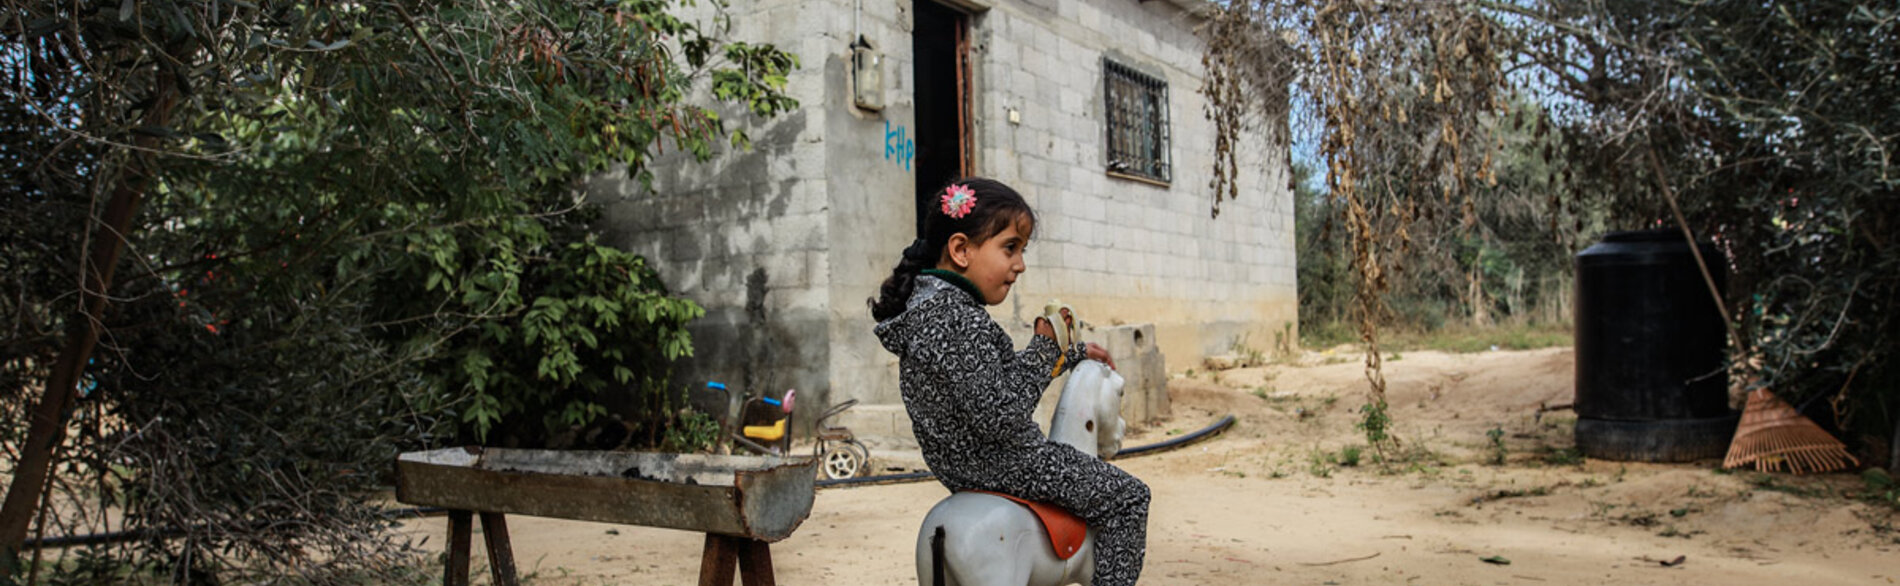 Four-year-old Leen Abu Hajras playing in front of her home in Khan Younis, the Gaza Strip, following her recovery from malnutrition. Photo by Mohammed Al Reefi for the Catholic Relief Services.